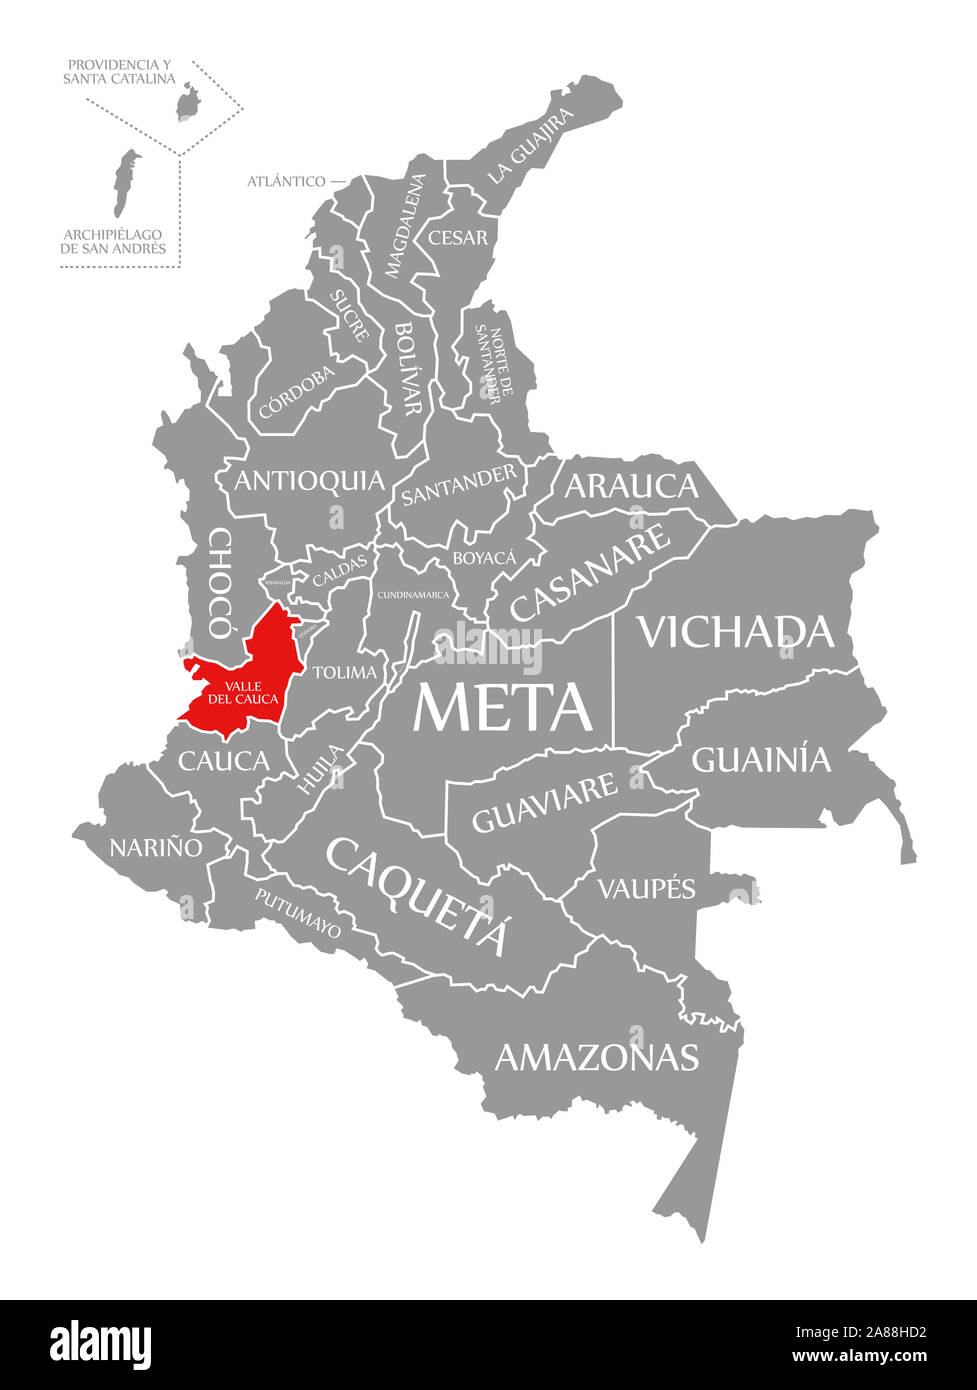 Valle del Cauca red highlighted in map of Colombia Stock Photo